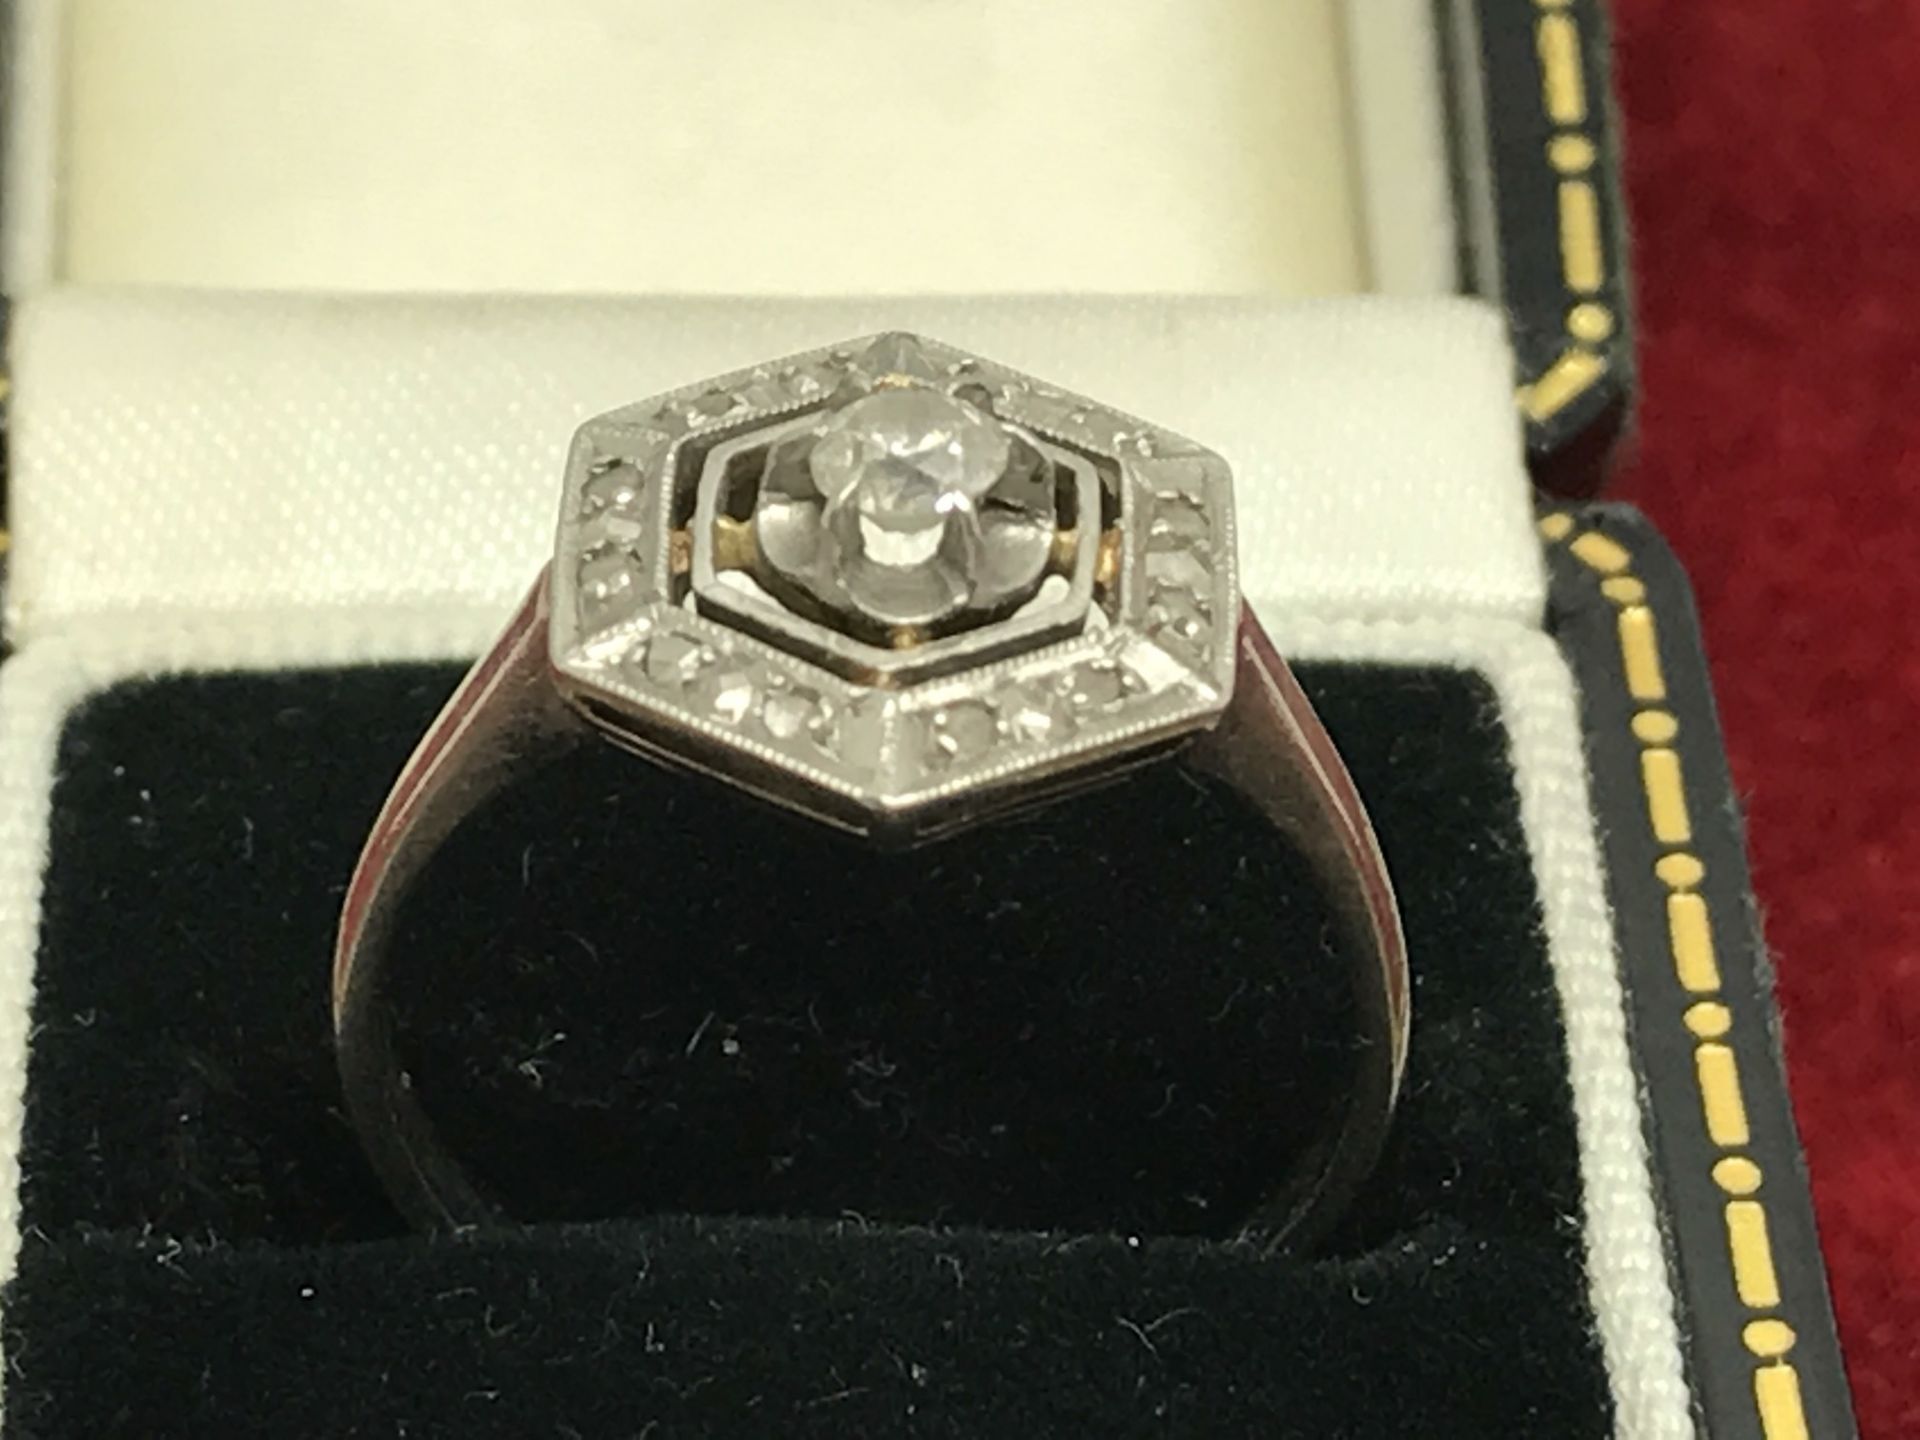 1920's DIAMOND RING SET IN WHITE METAL TESTED AS PLATINUM - Image 2 of 2